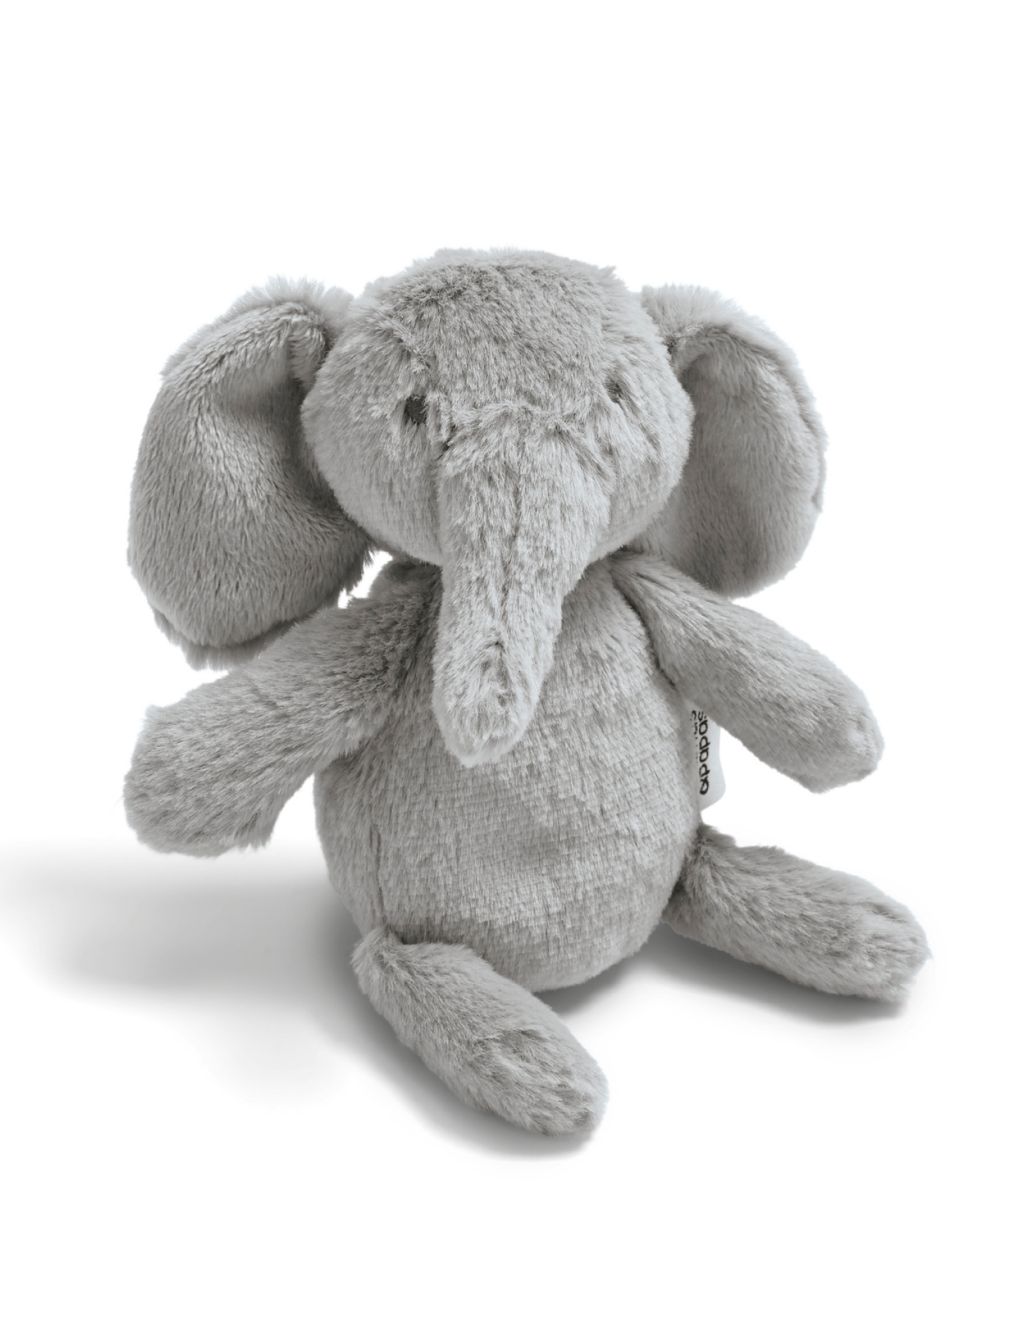 Welcome to the World Small Elephant Soft Toy image 1